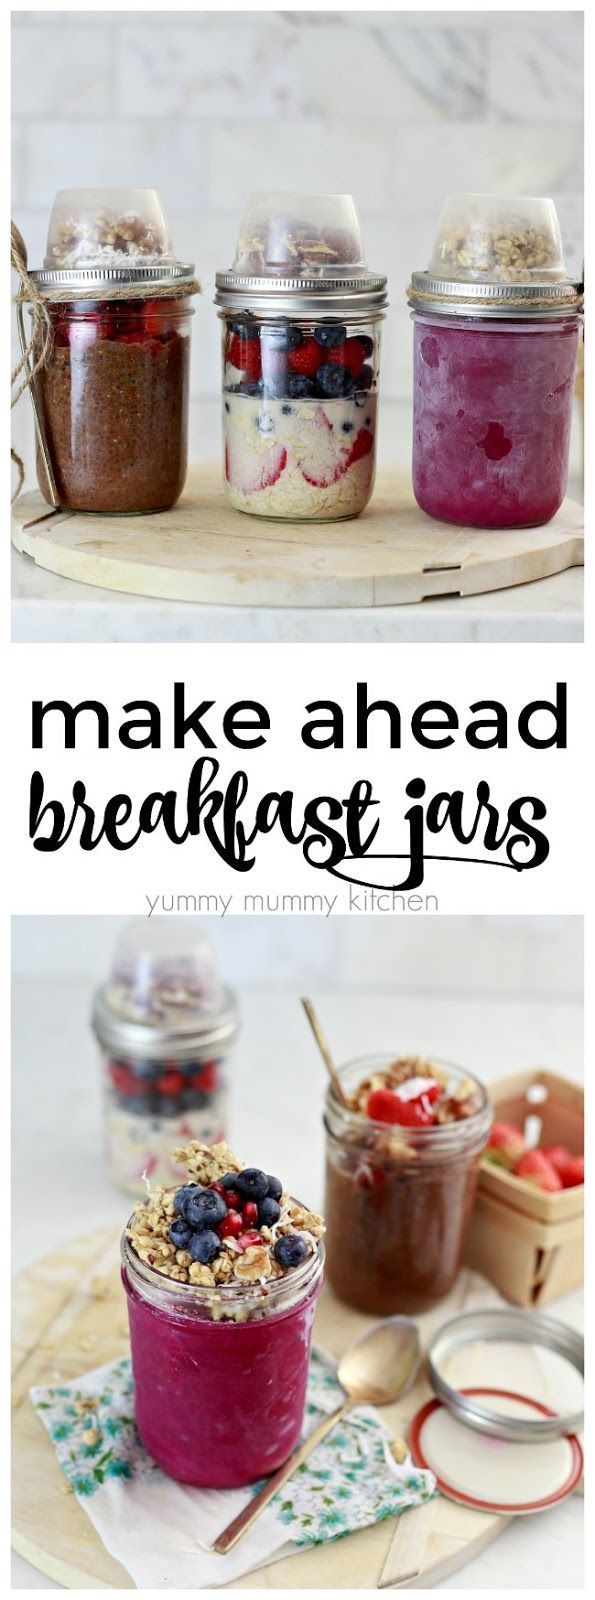 Mason jar breakfast and snack recipes. Vegan chia pudding, overnight oatmeal, and dragon fruit bowls. The perfect grab-and-go